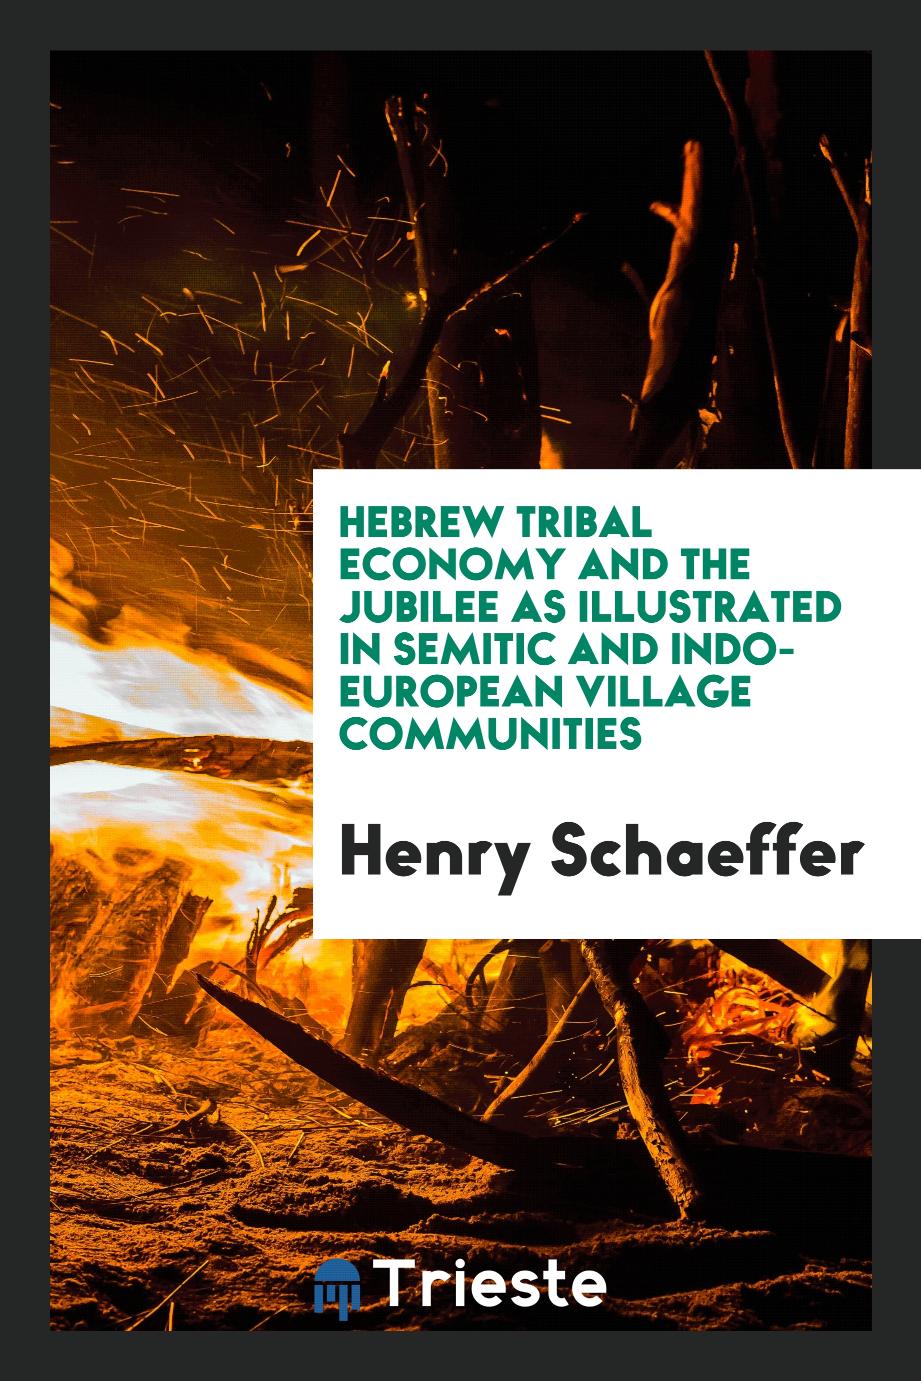 Hebrew tribal economy and the jubilee as illustrated in Semitic and Indo-European village communities